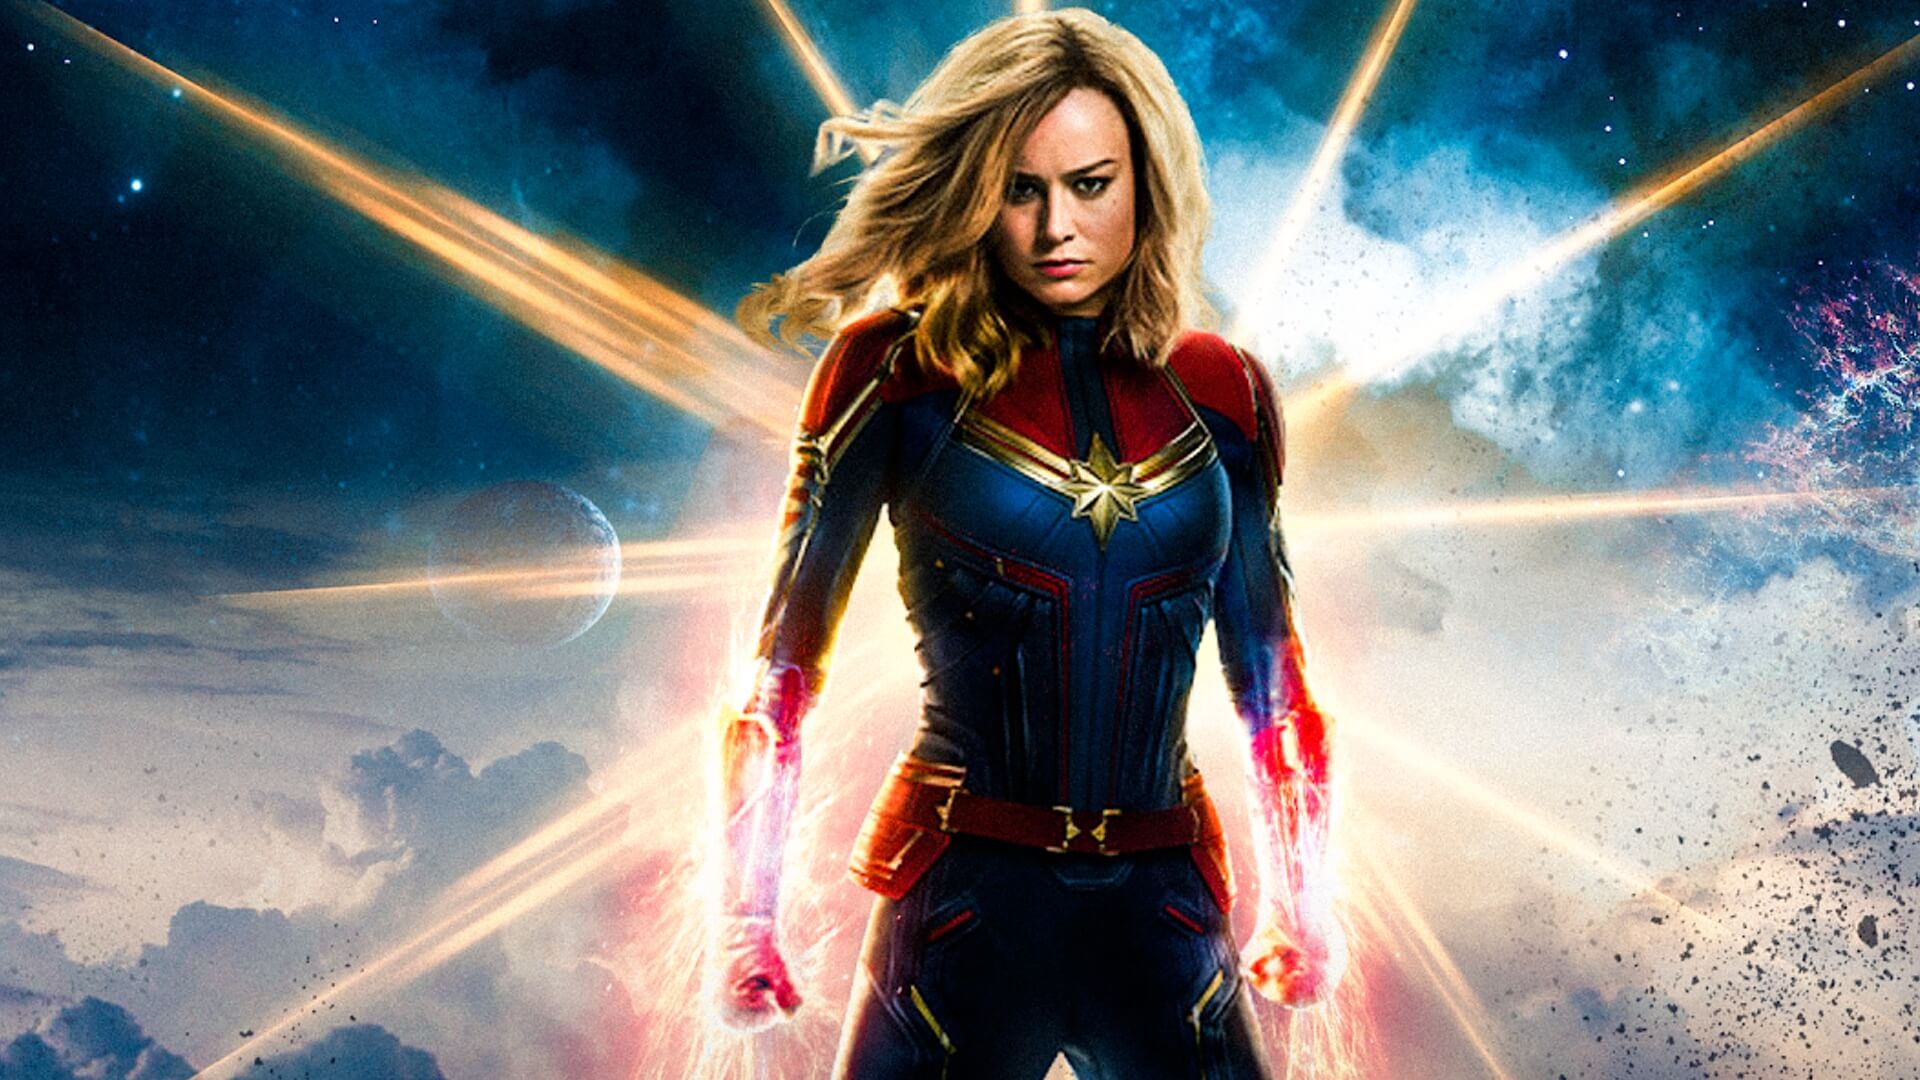 Marvel Studios: Can Captain Marvel become the leader of the Avengers in the future of the MCU?